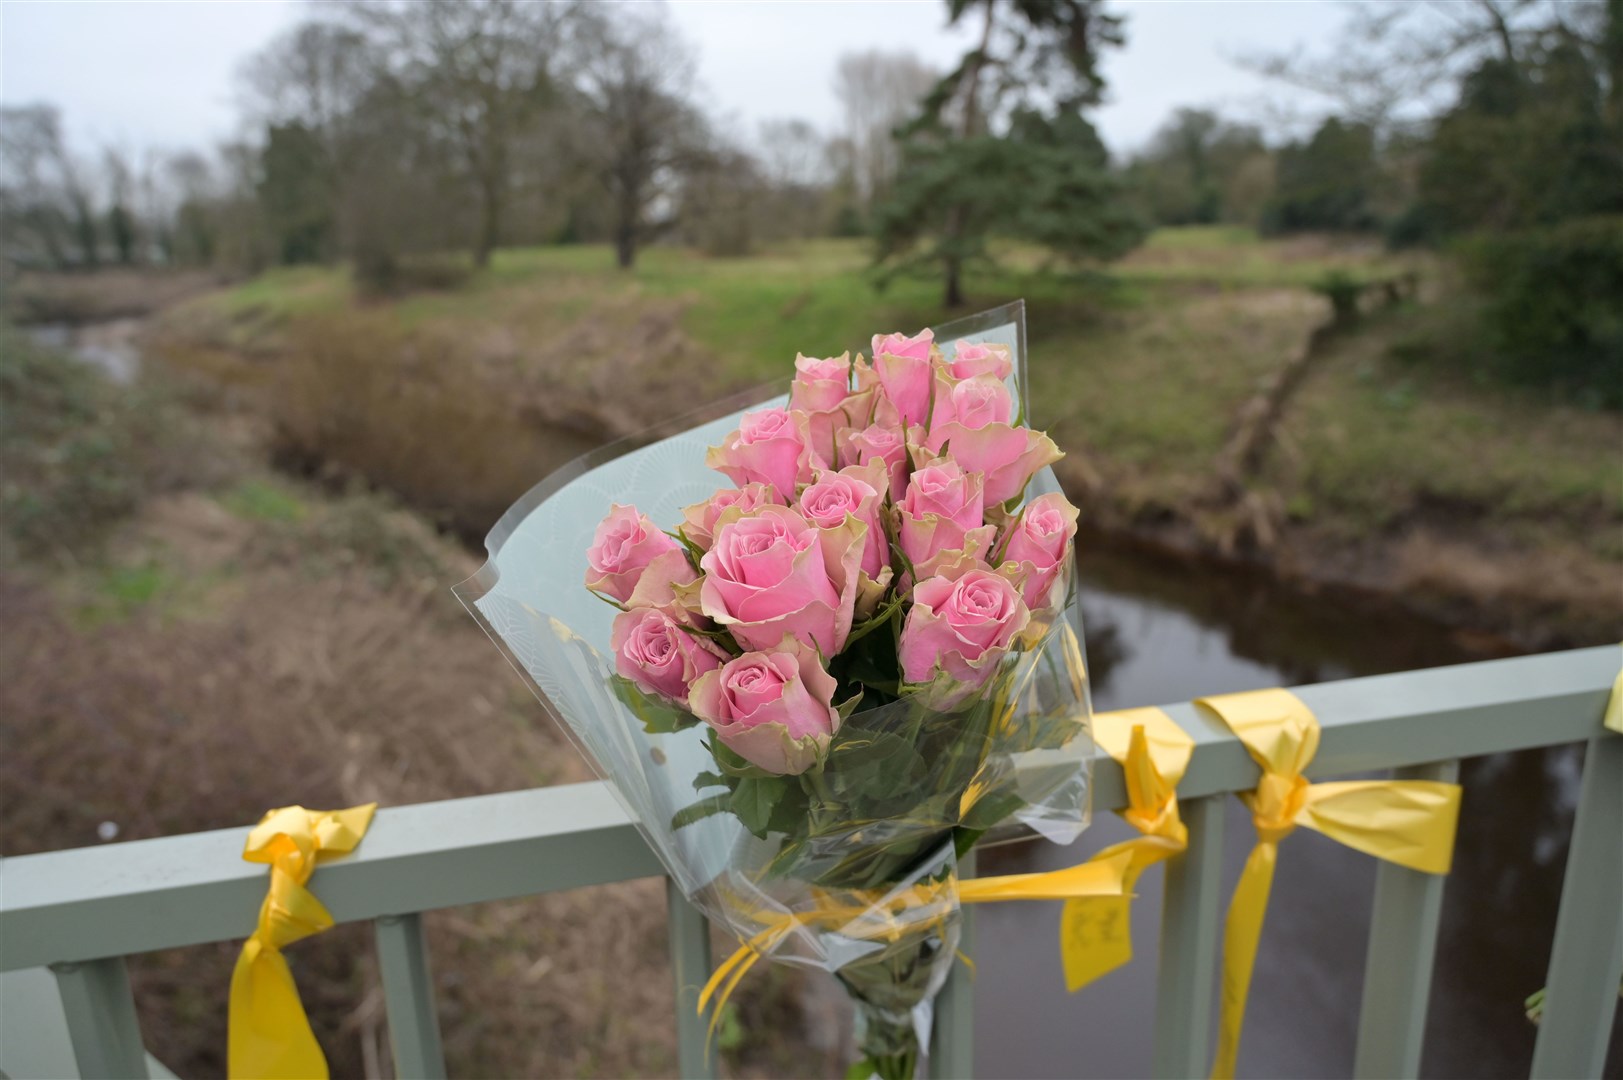 Flowers and ribbons on a bridge over the River Wyre in St Michael’s on Wyre, Lancashire, where Nicola Bulley’s body was found (Dave Nelson/PA)